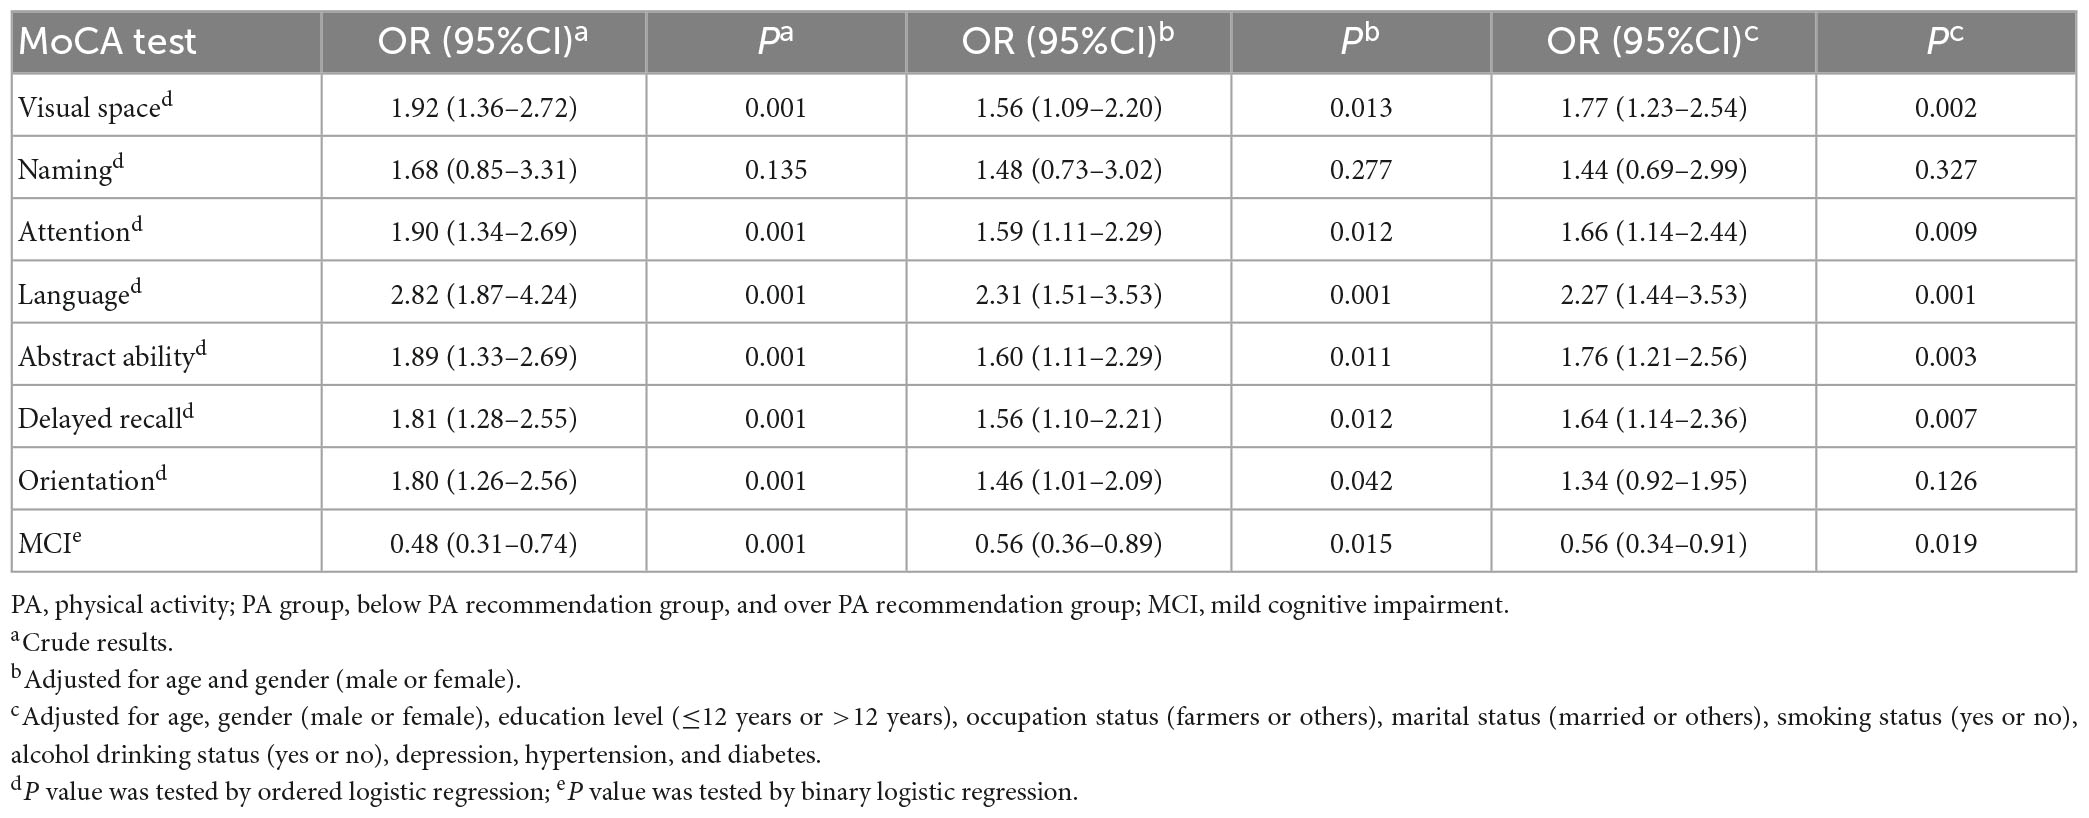 Physical activity and cognitive function in older persons – SEMS-journal